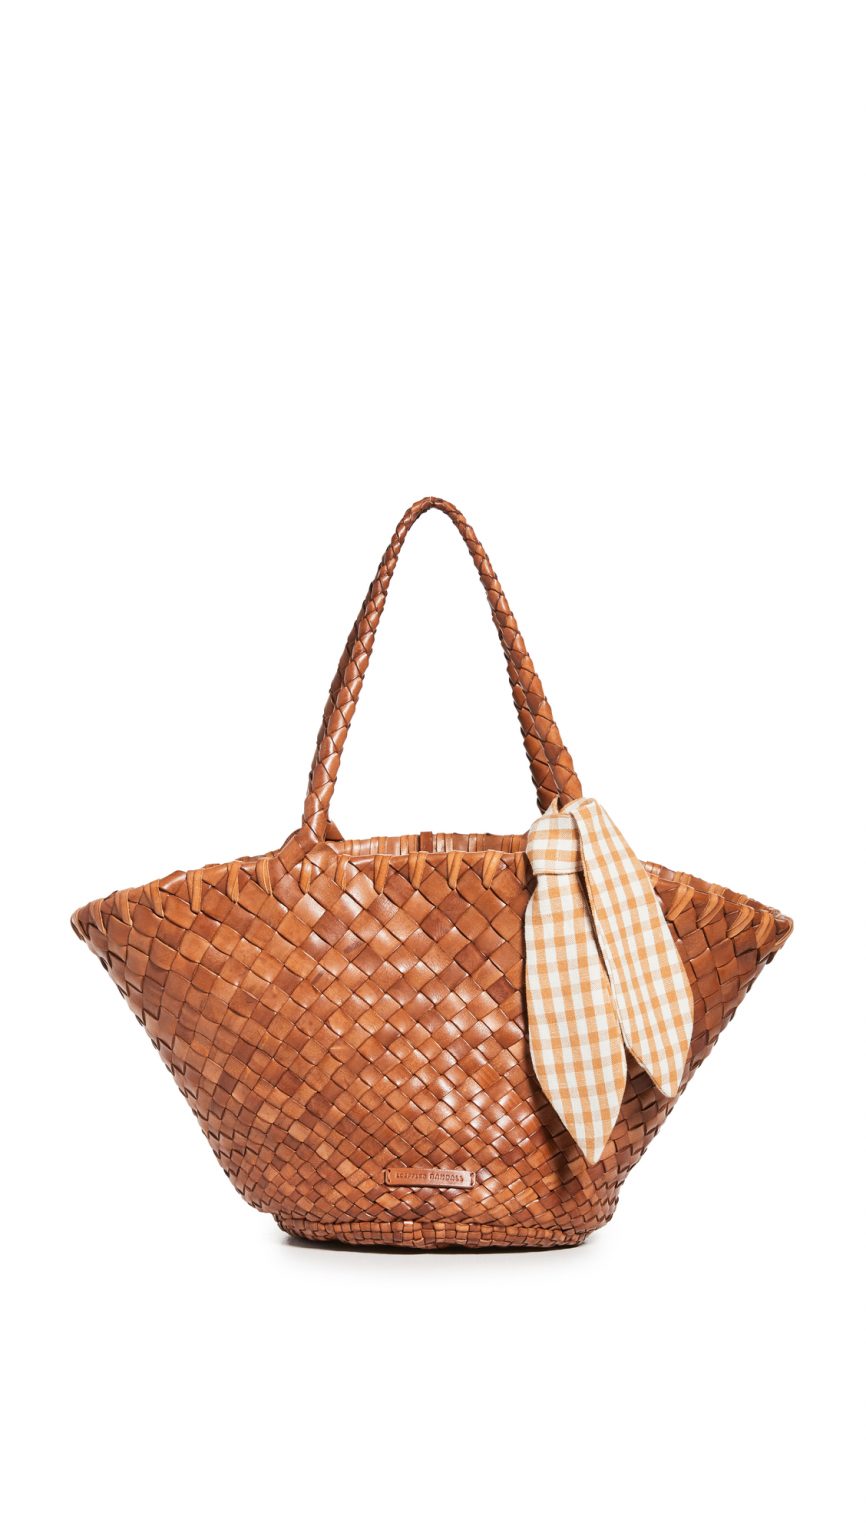 Loeffler Randal Kai woven leather tote, best beach totes for 2021, chic ...